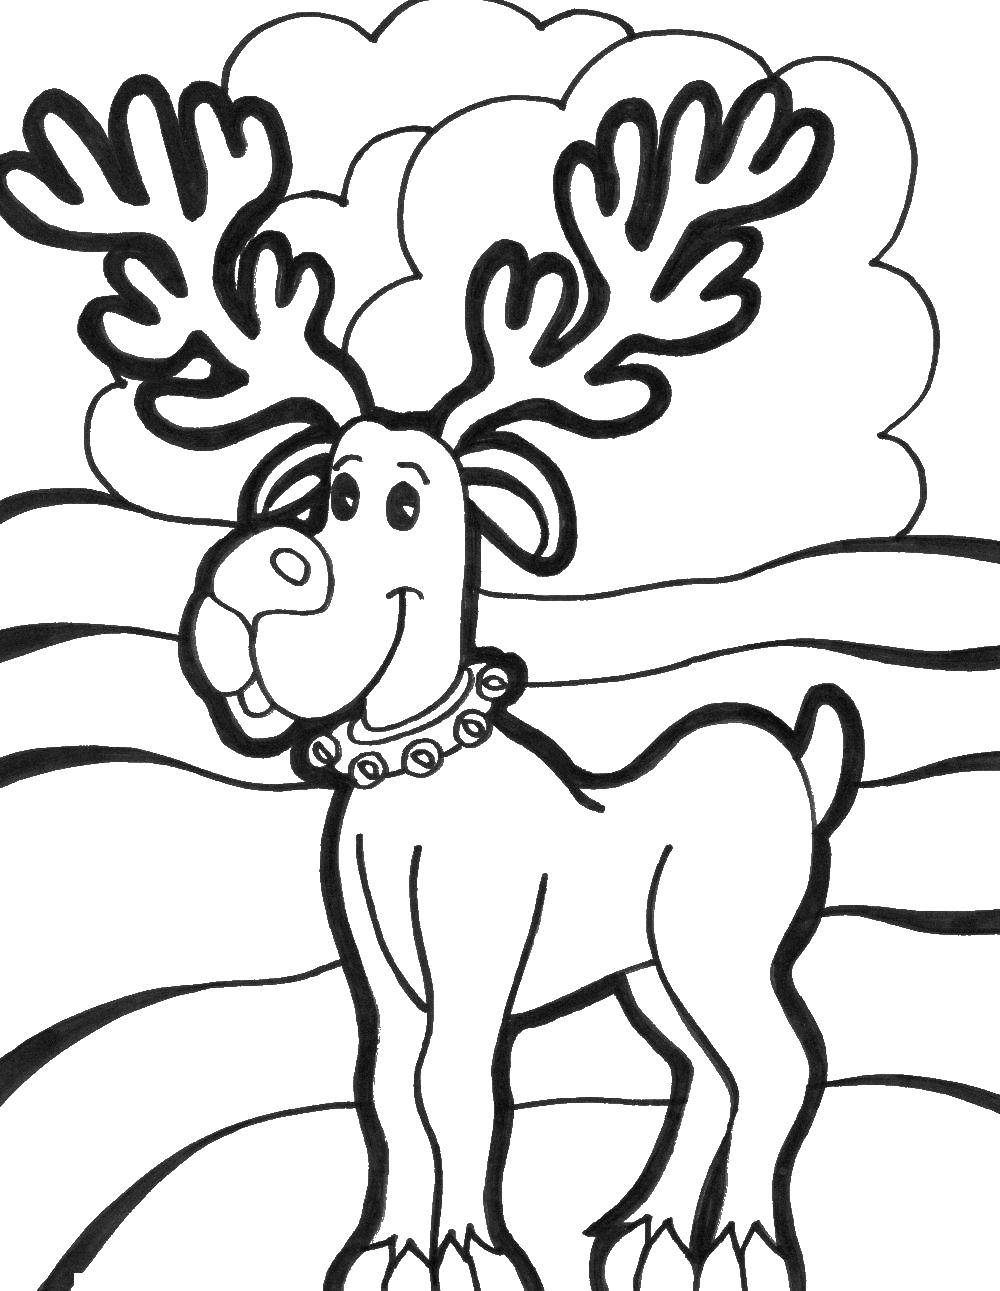 Coloring Rudolf. Category Christmas. Tags:  reindeer, red nose, horns.